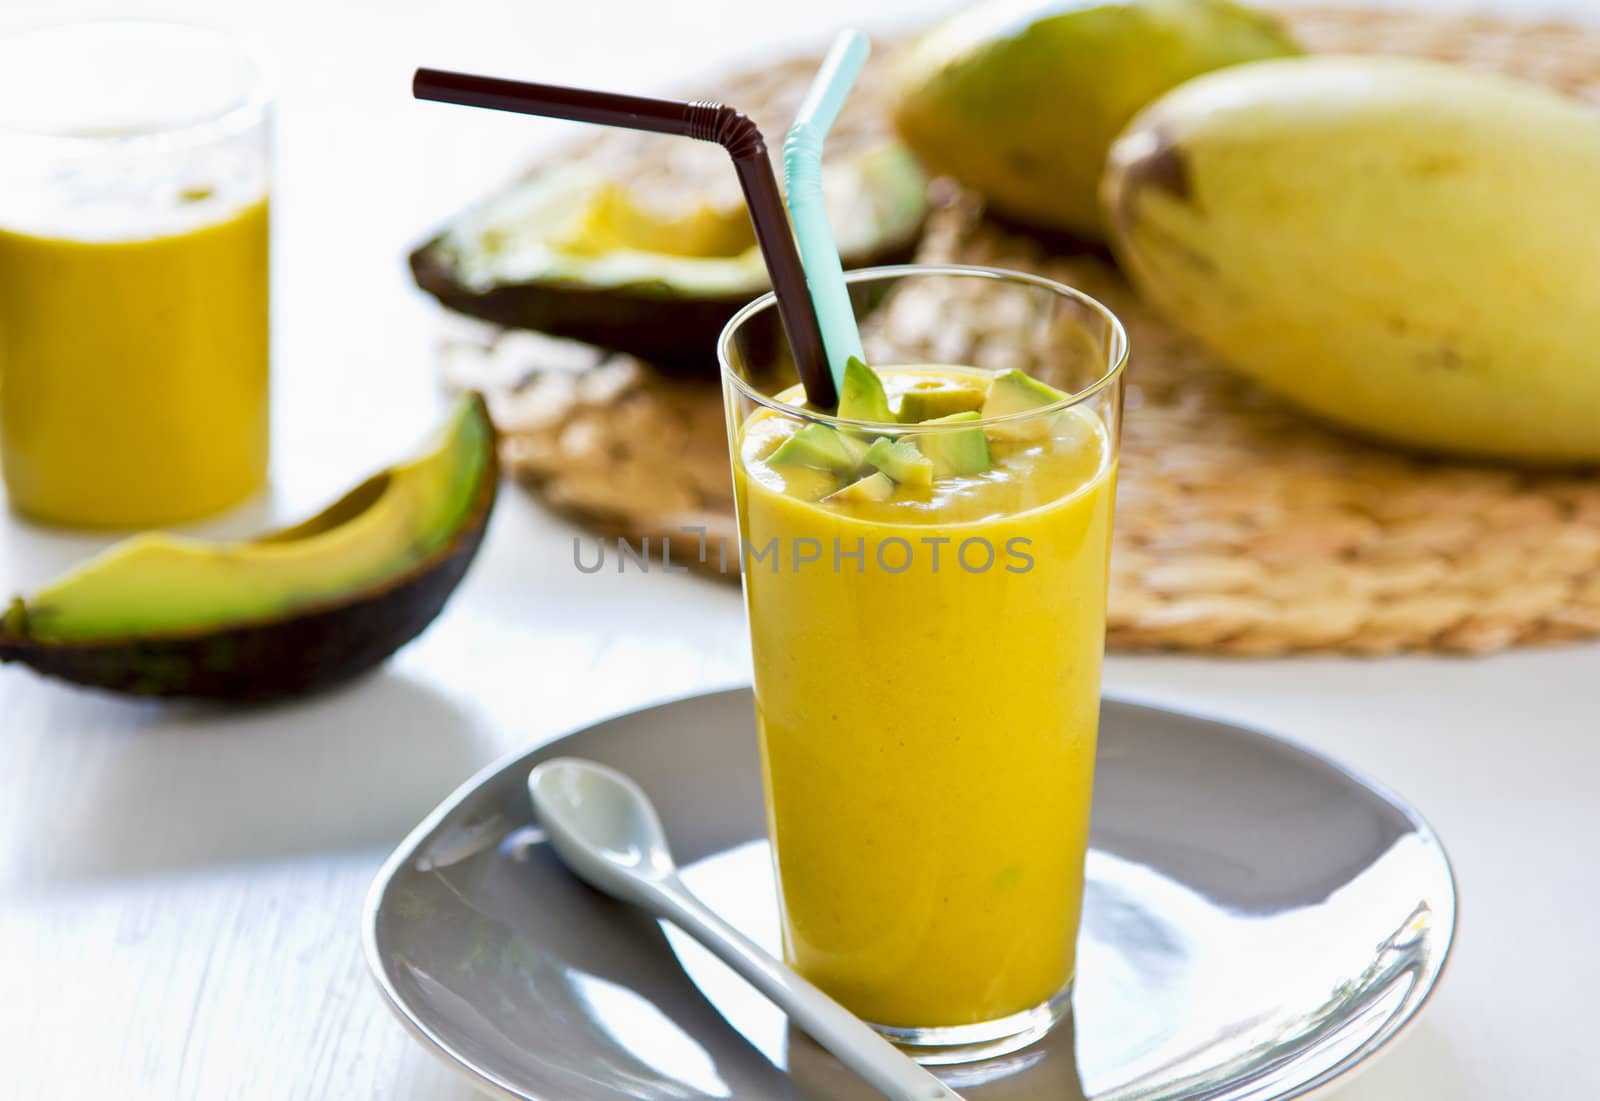 Avocado with Mango smoothie by vanillaechoes